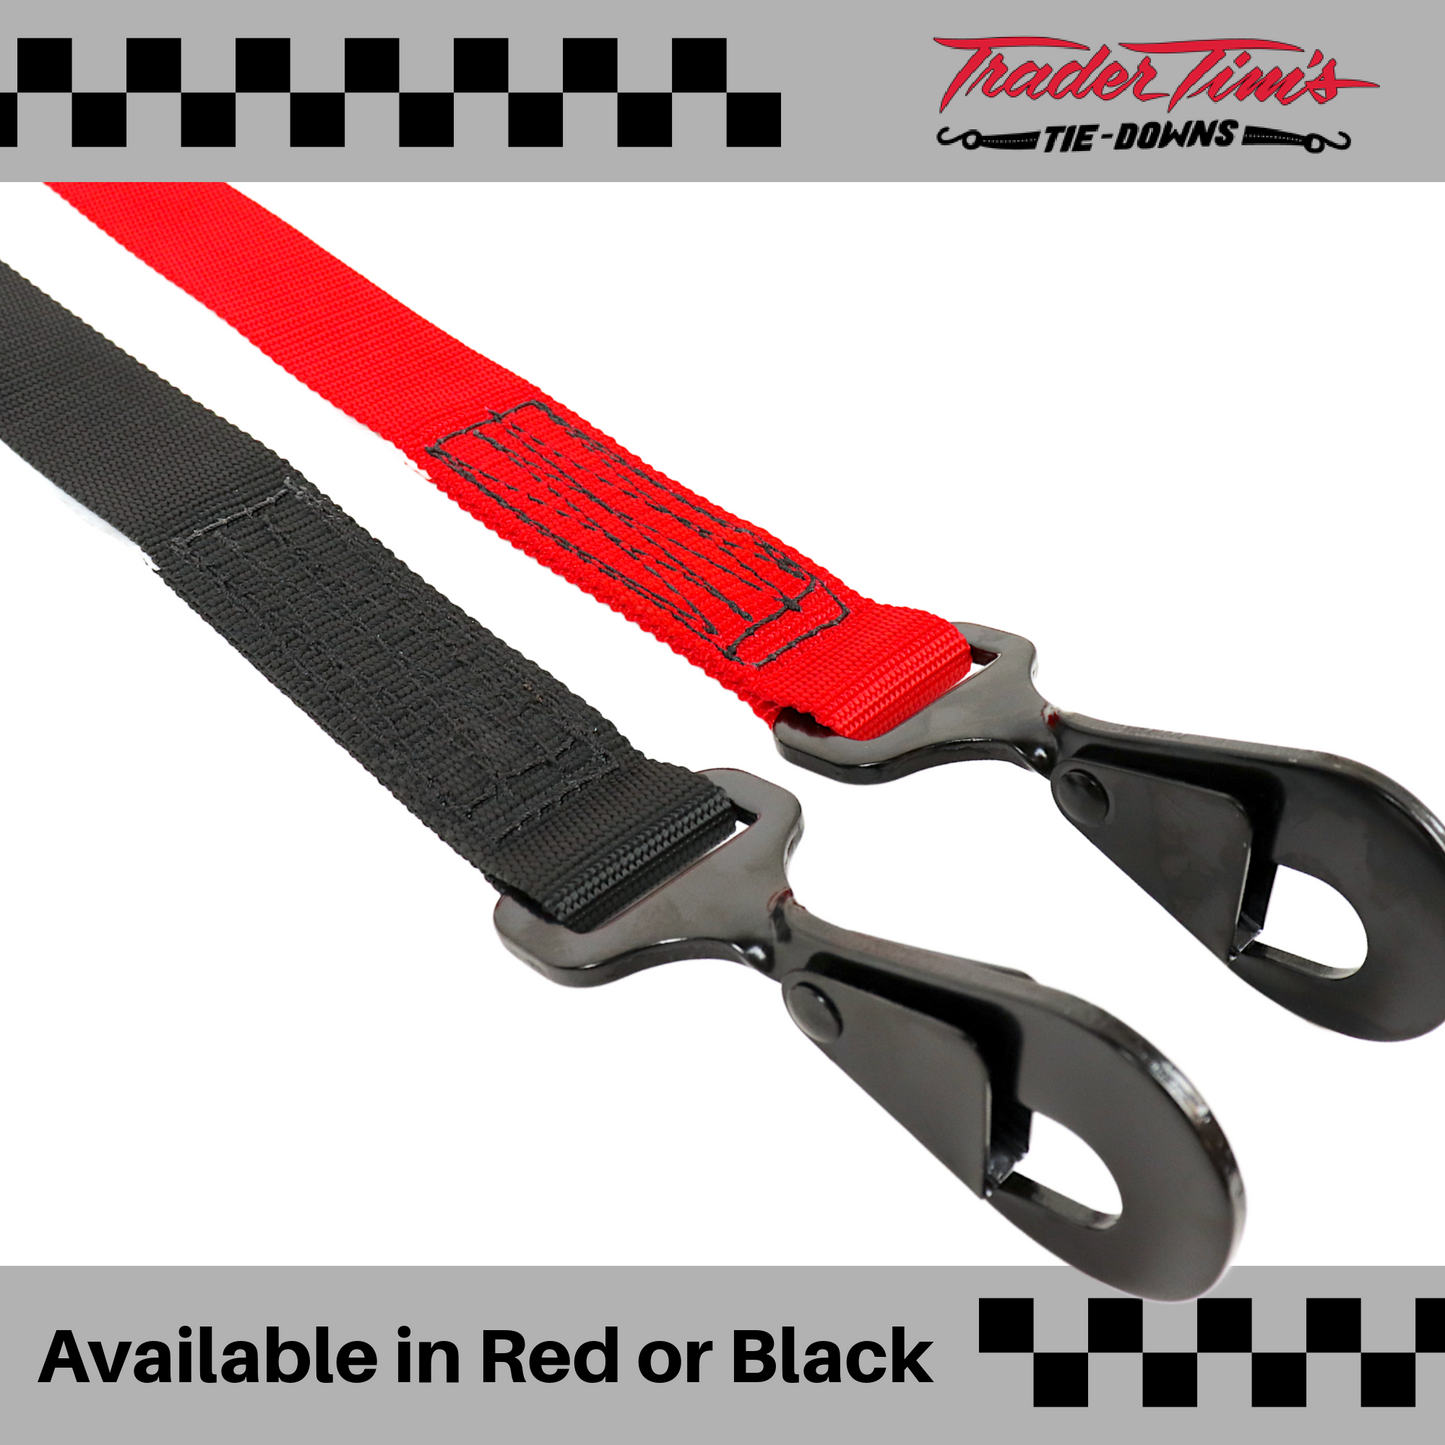 1.5" x 6' Ratchet Tie Down - Red or Black